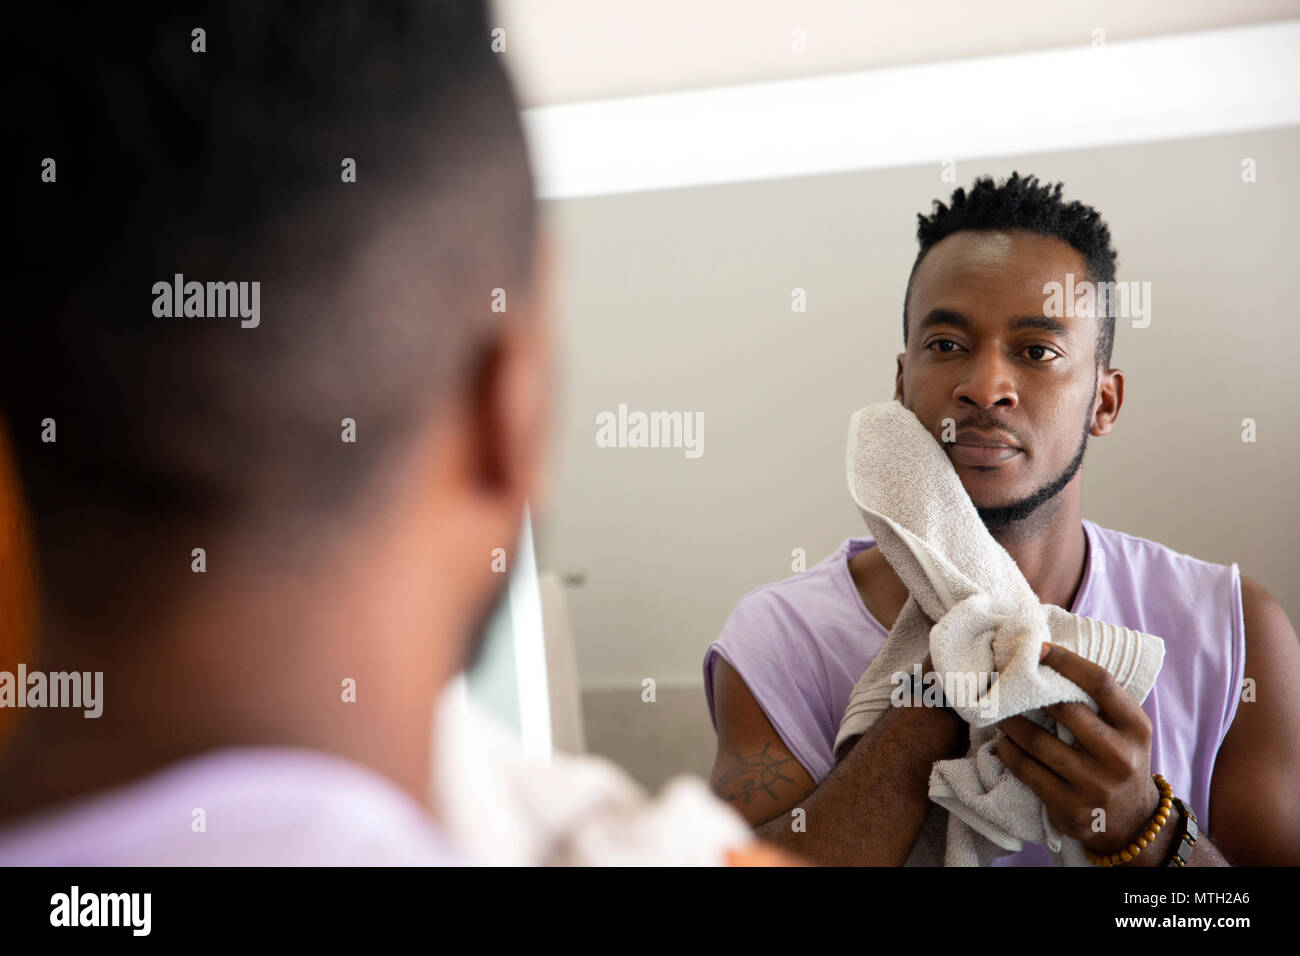 Man cleaning face with towel Stock Photo